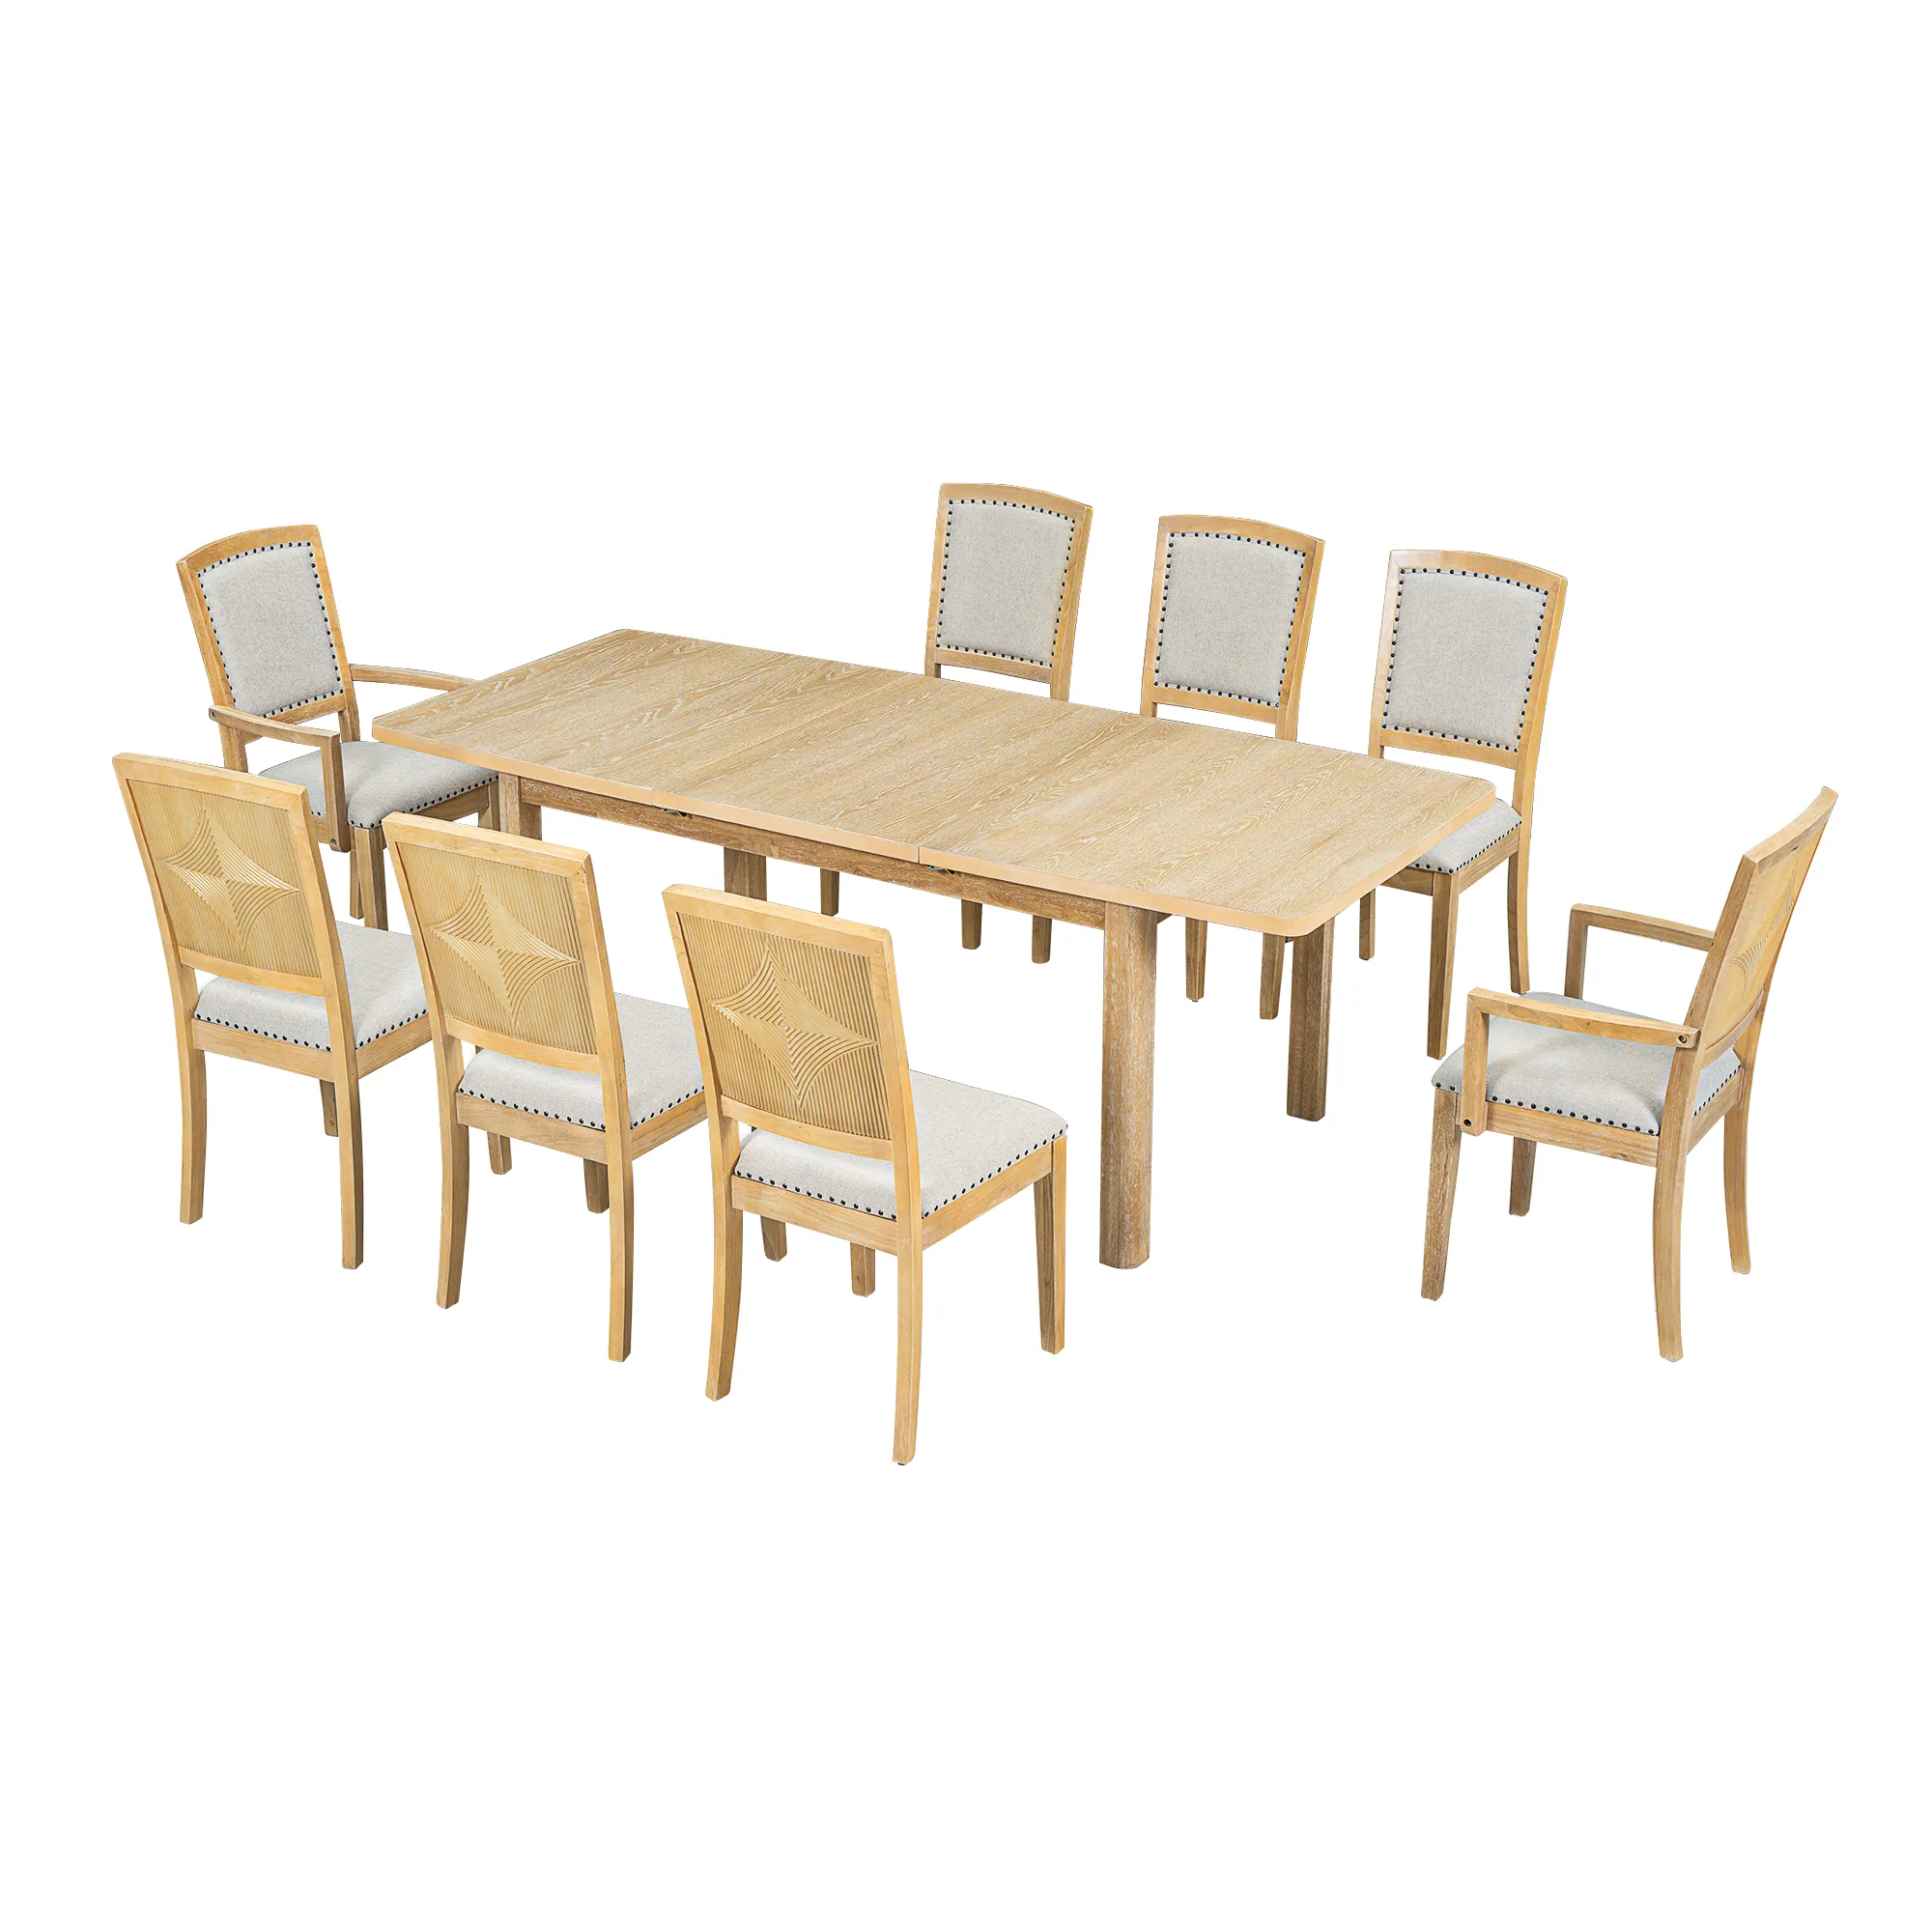 Merax 9 Pieces Rustic Extendable Table Chairs Dining Set